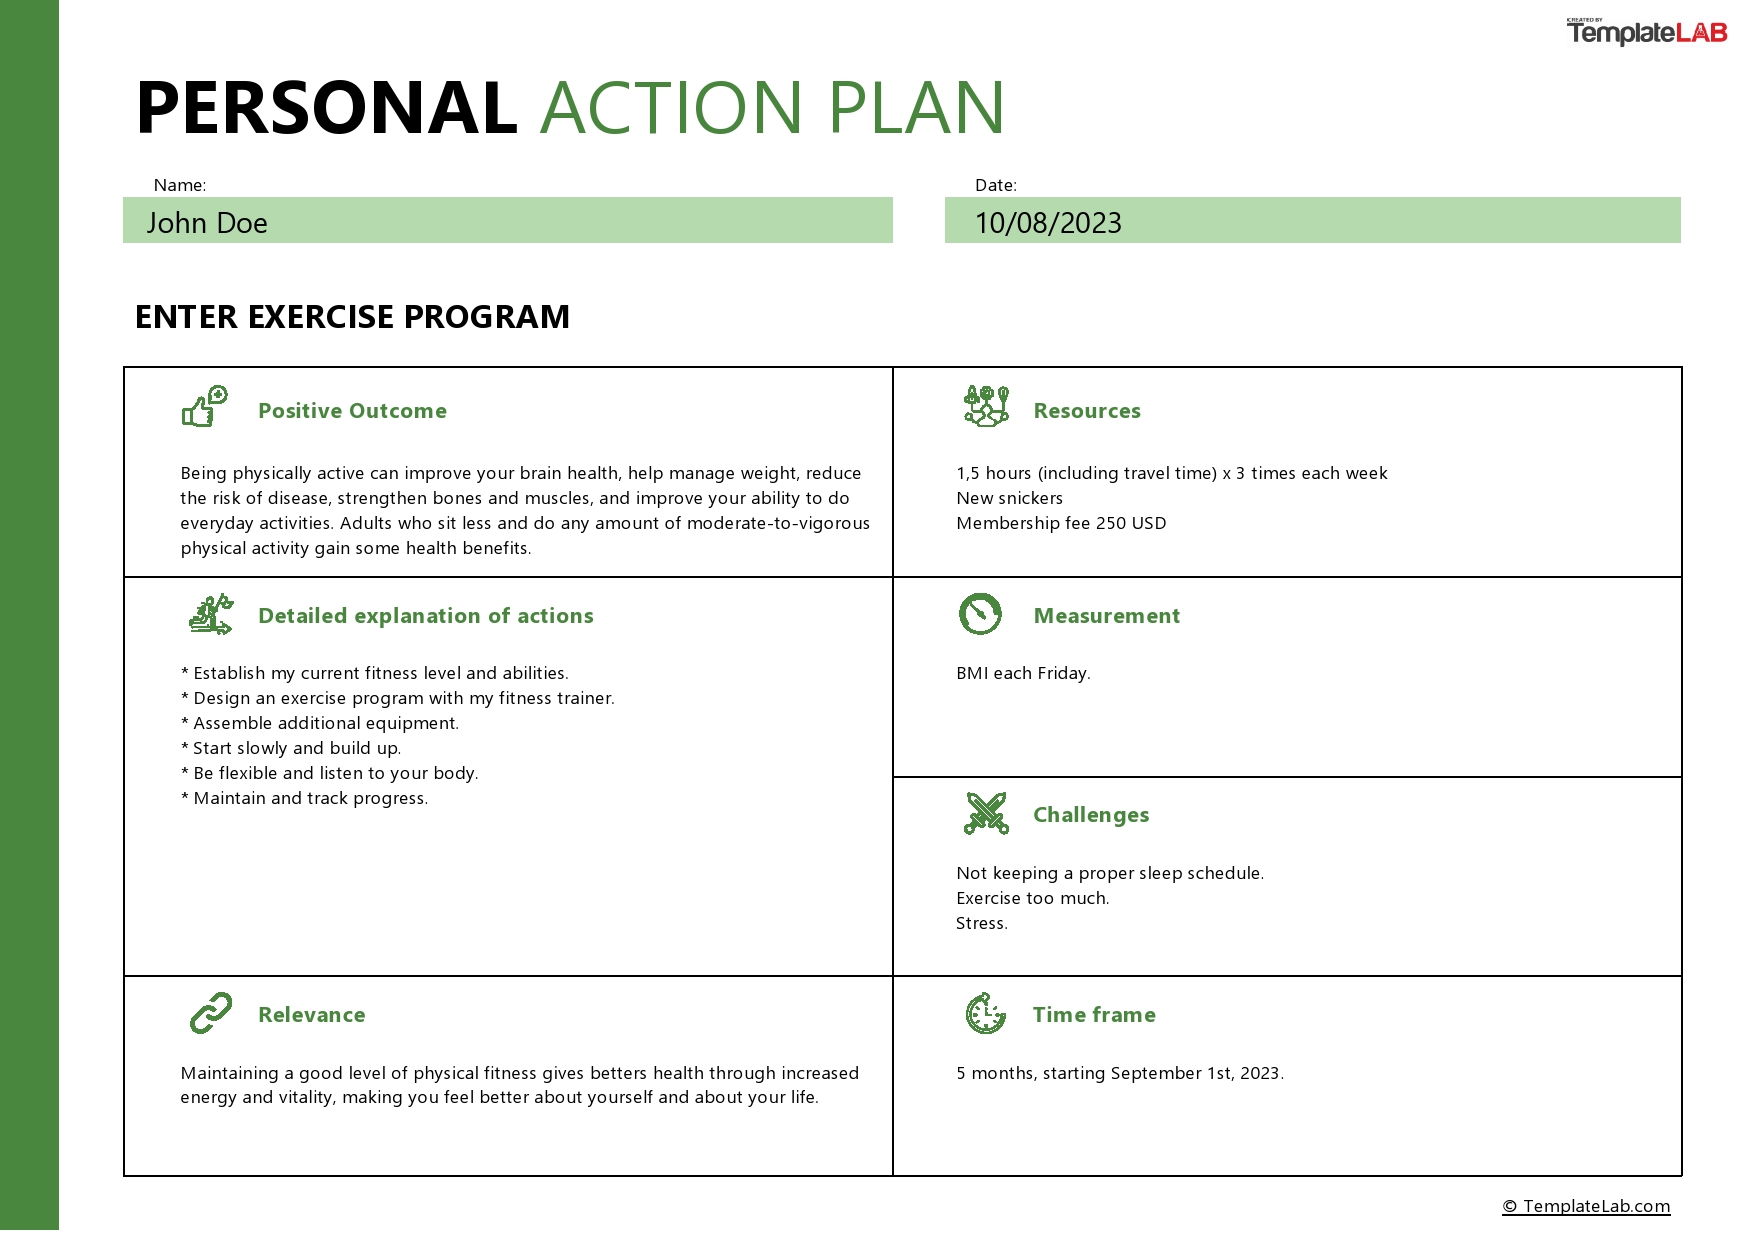 personal action plan template, personal development action plan template, personal project action plan template, personal sales action plan template, personal goal action plan template, personal mental health action plan template, personal leadership action plan template, personal strategic action plan template